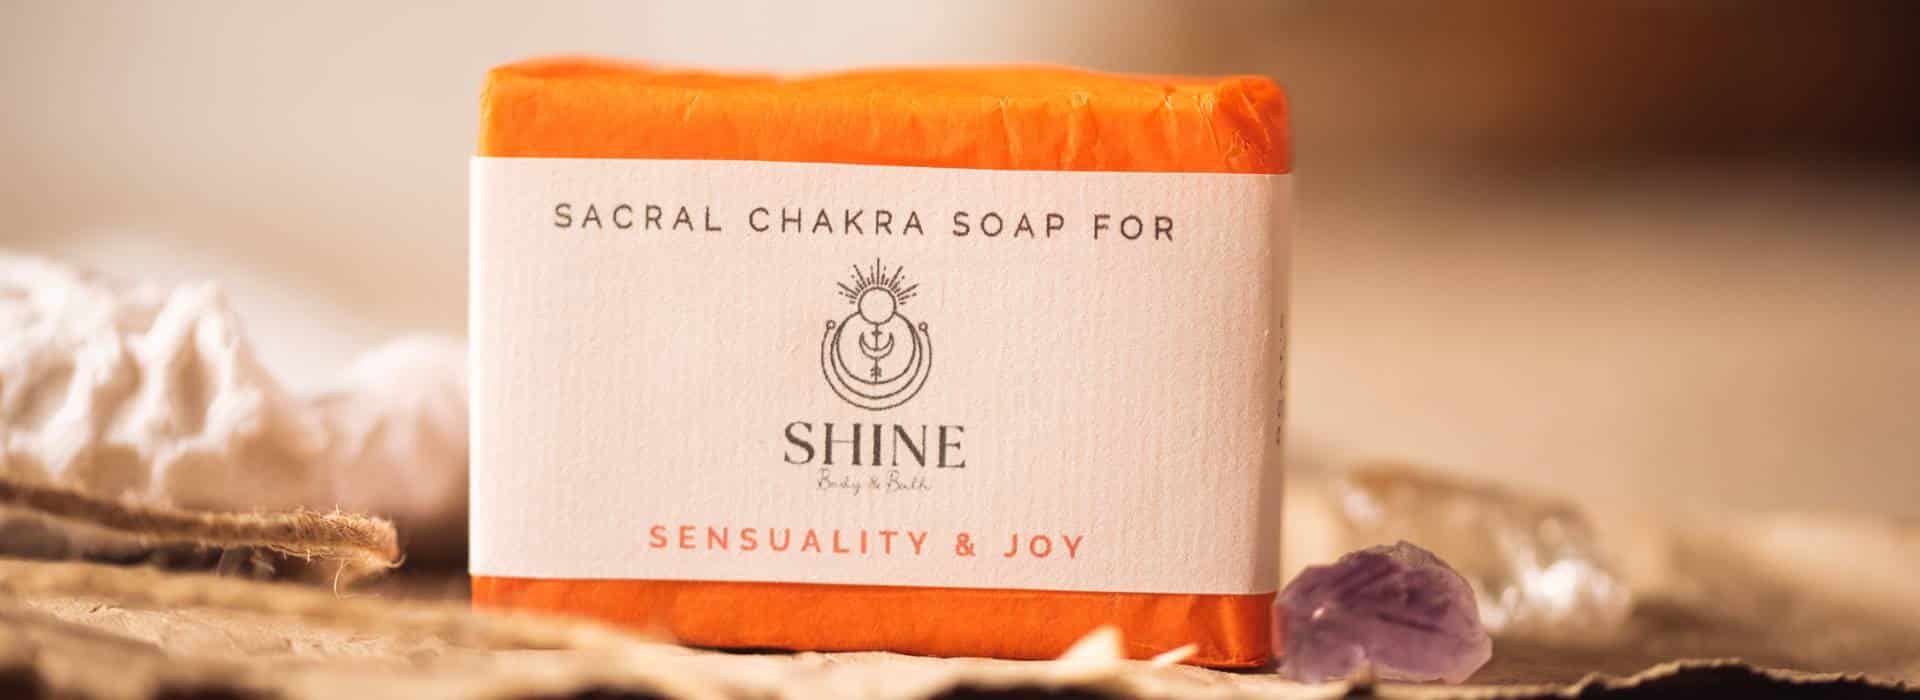 Sacral Chakra Soap, wrapped with crystal | Homepage banner | Shine Body & Bath